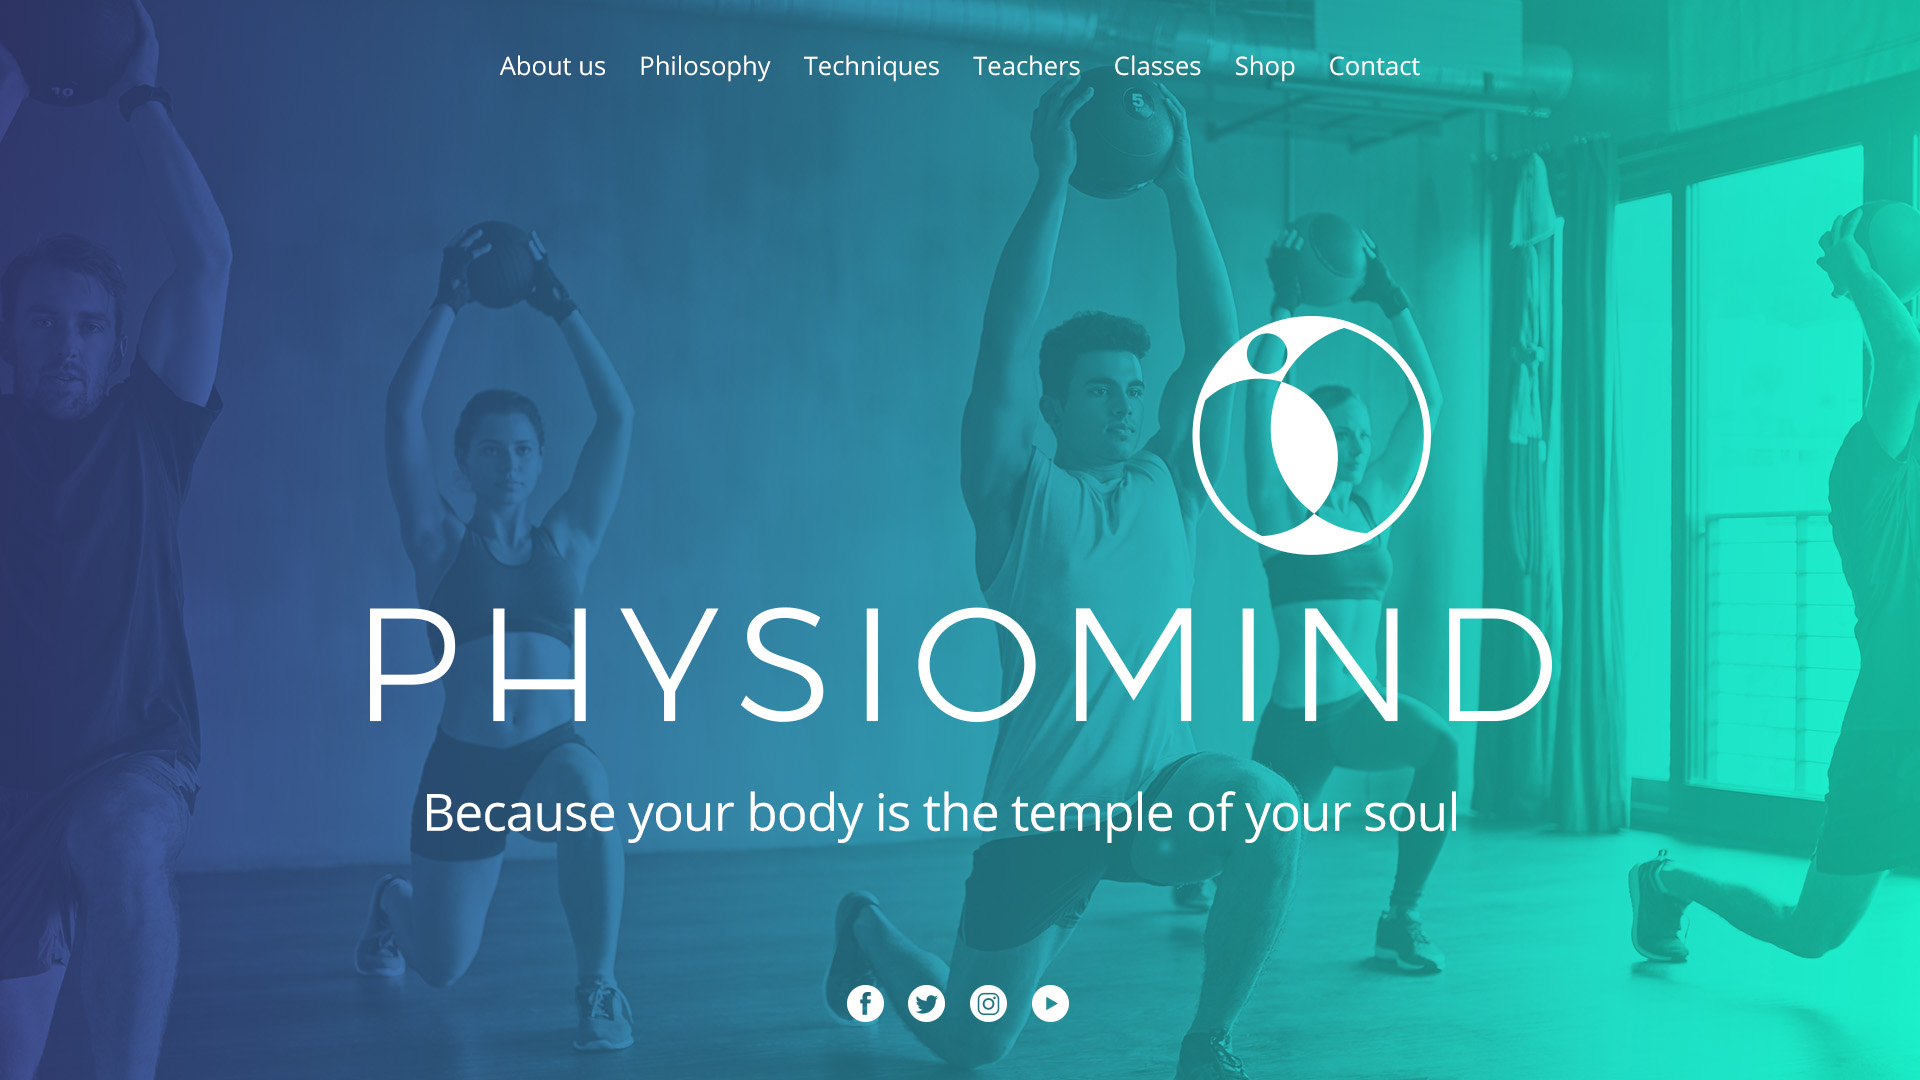 Physiomind